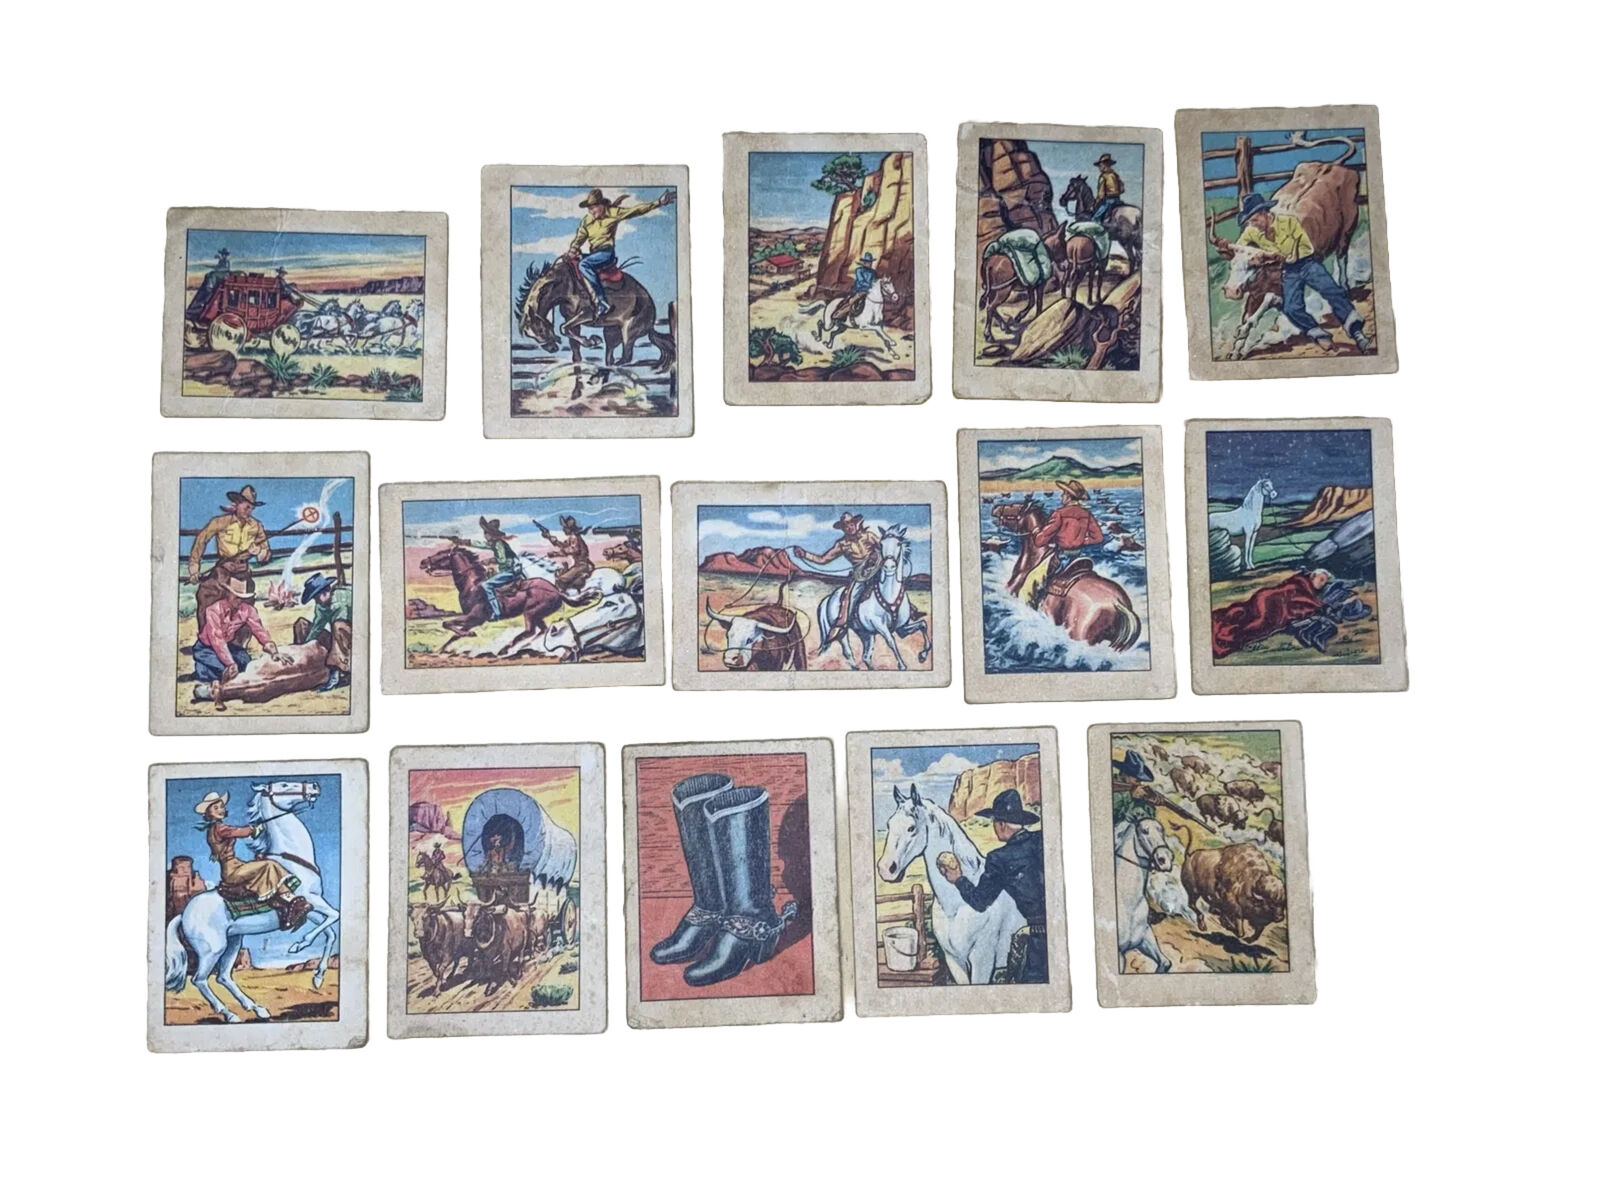 1951 Post Cereal Hopalong Cassidy / Wm. Boyd Wild West ~ Small Lot Of 15 Cards